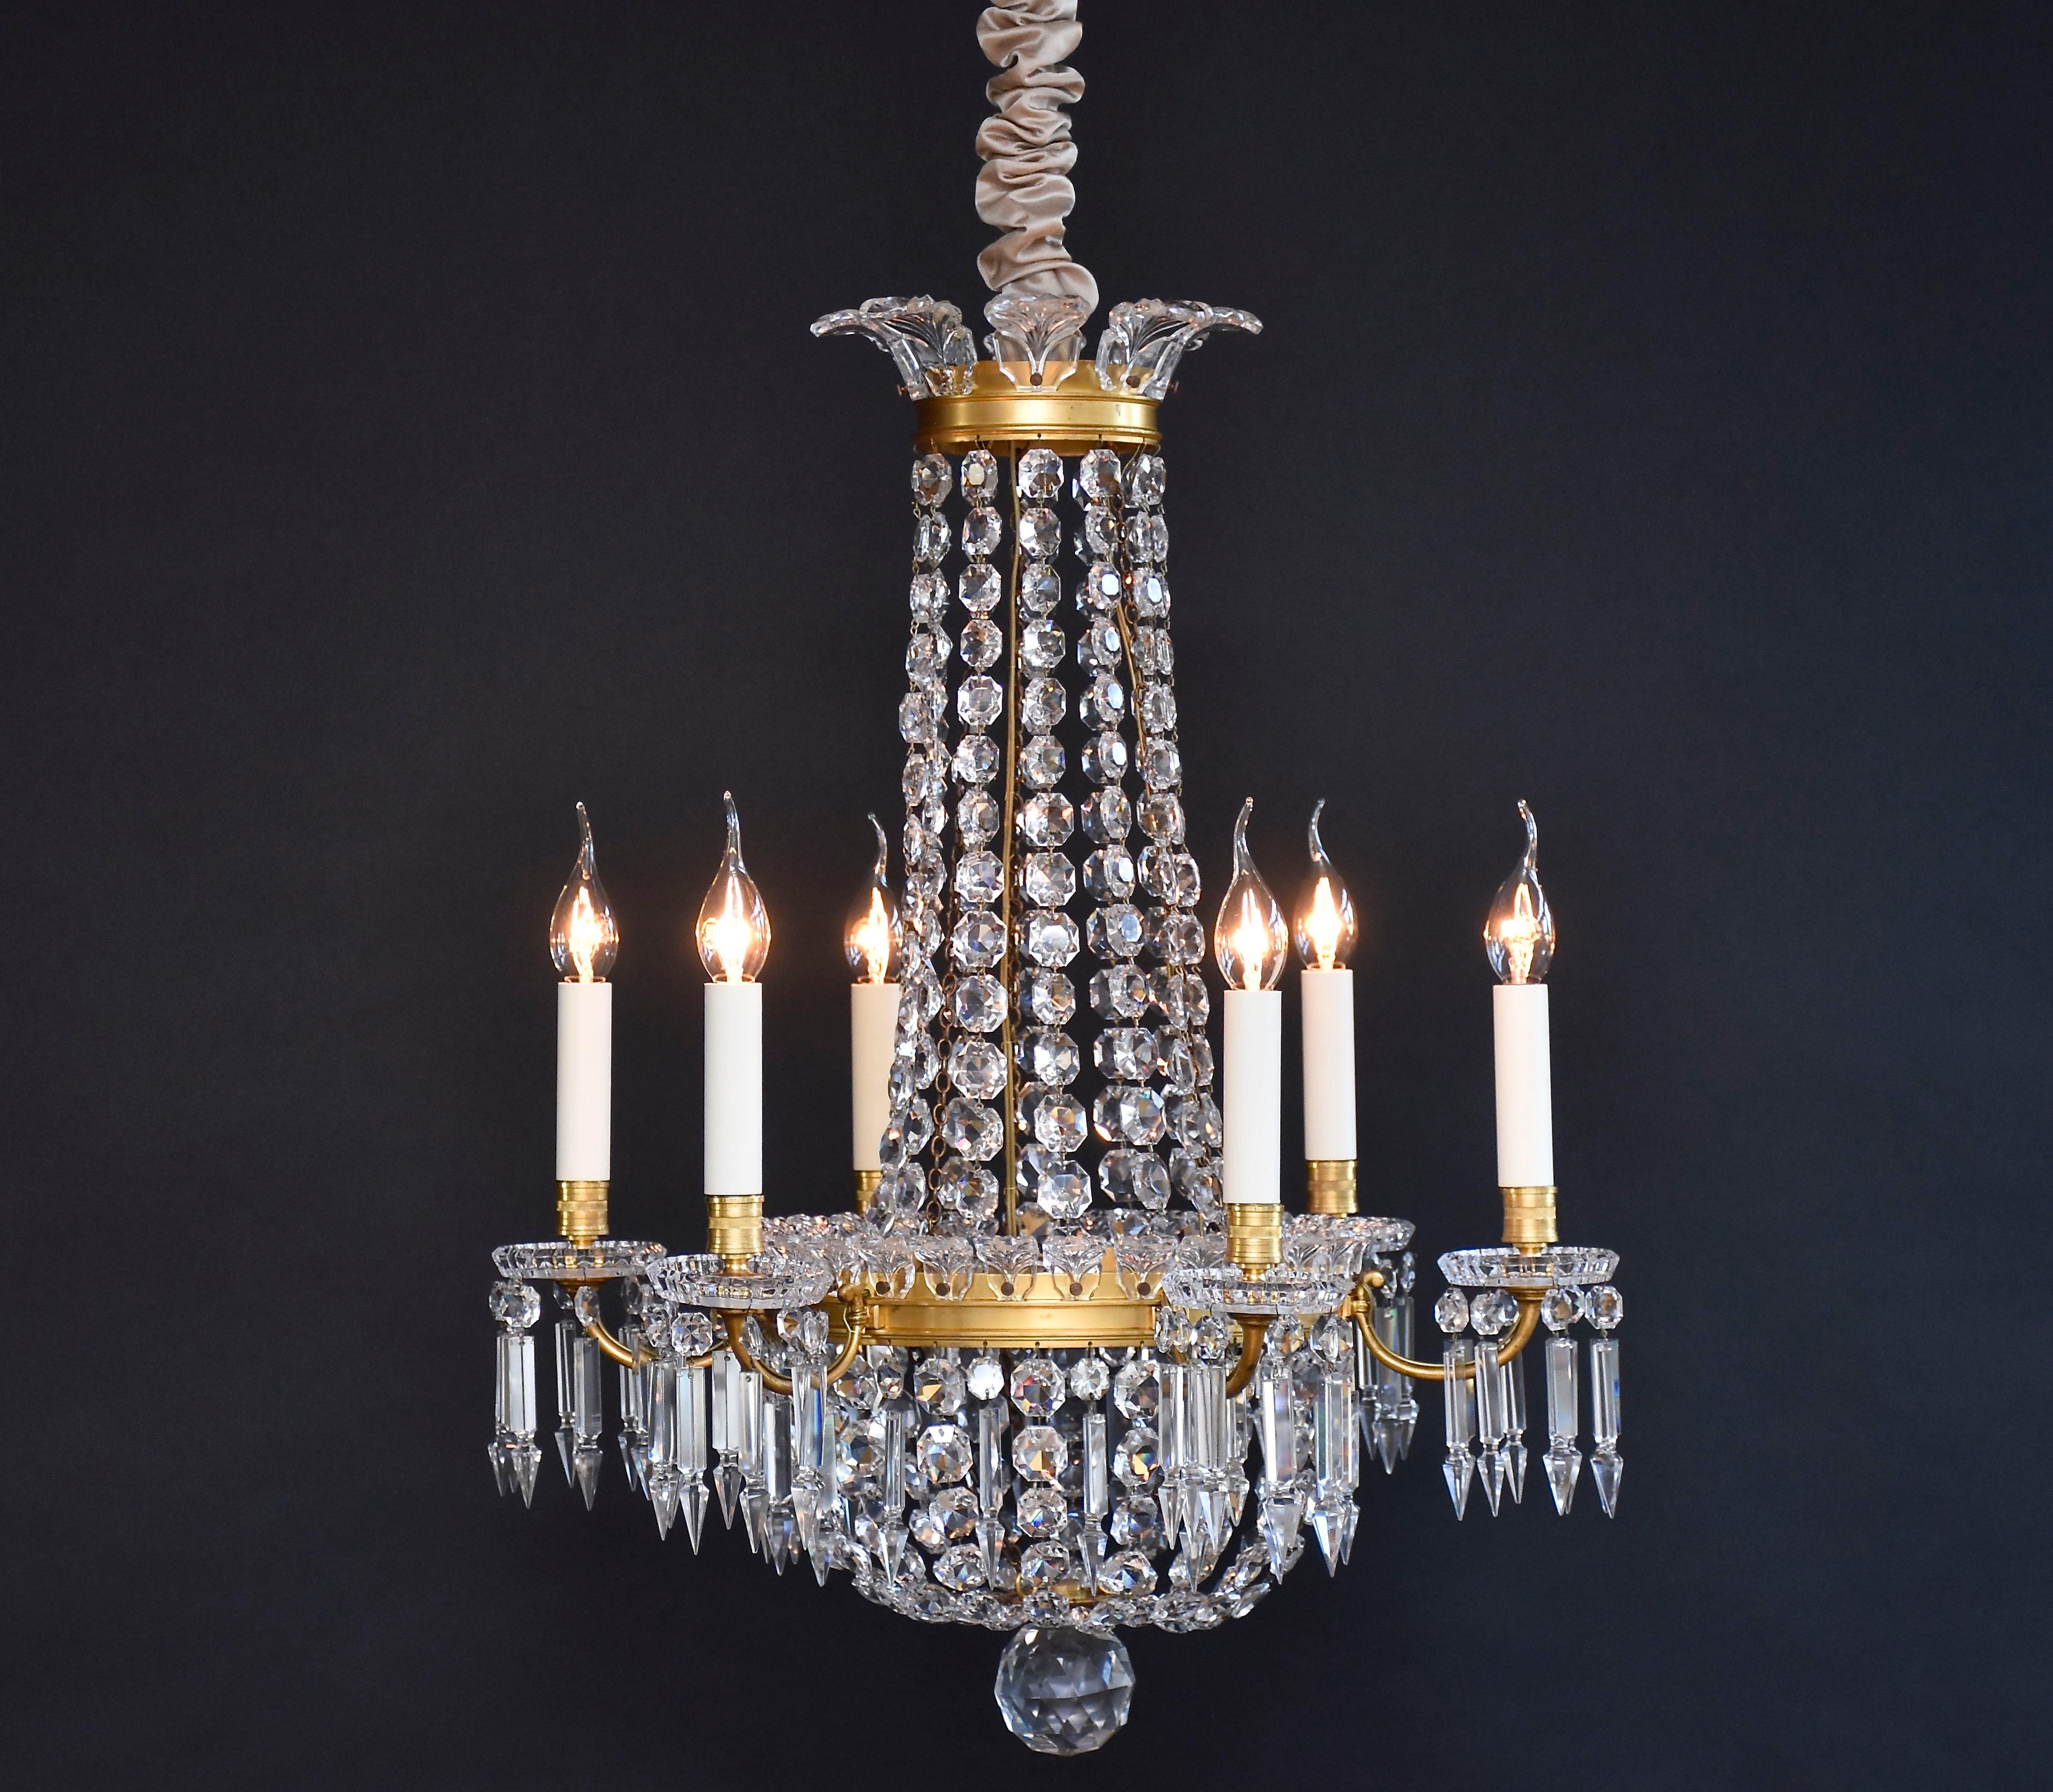 A beautiful French gilt bronze Baccarat chandelier. 
With 6 candle arms around the chandelier.
Decorated with strings of faceted Baccarat octagons and drops.
The crown and central ring decorated with mounted acanthus leaves.
Below the chandelier